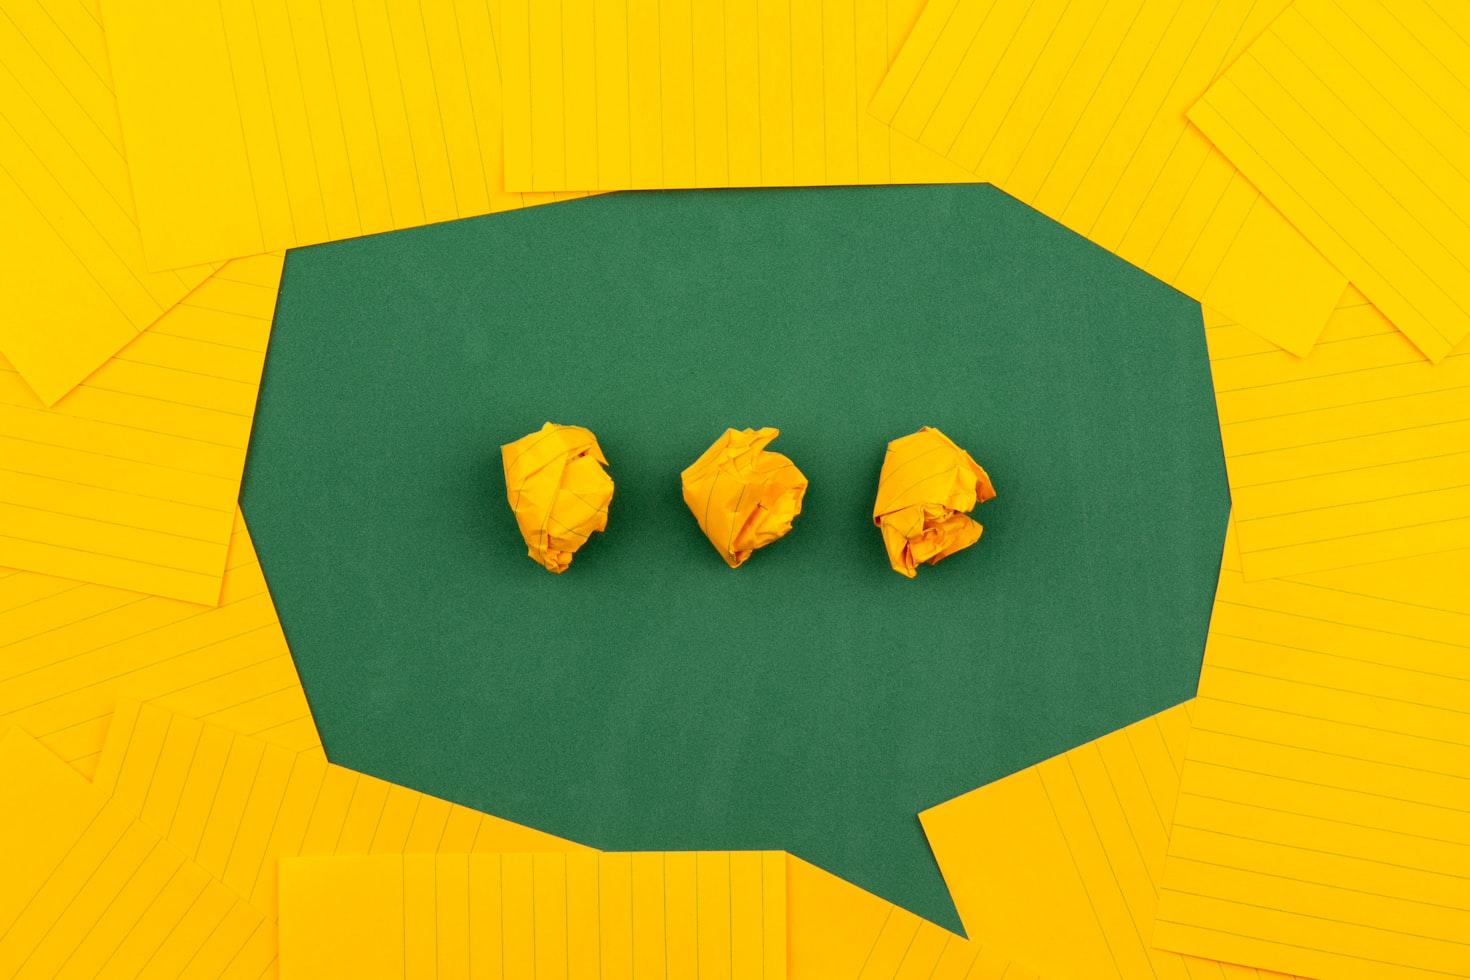 Three yellow scrunched up notes as balls against a green background shaped like a message bubble